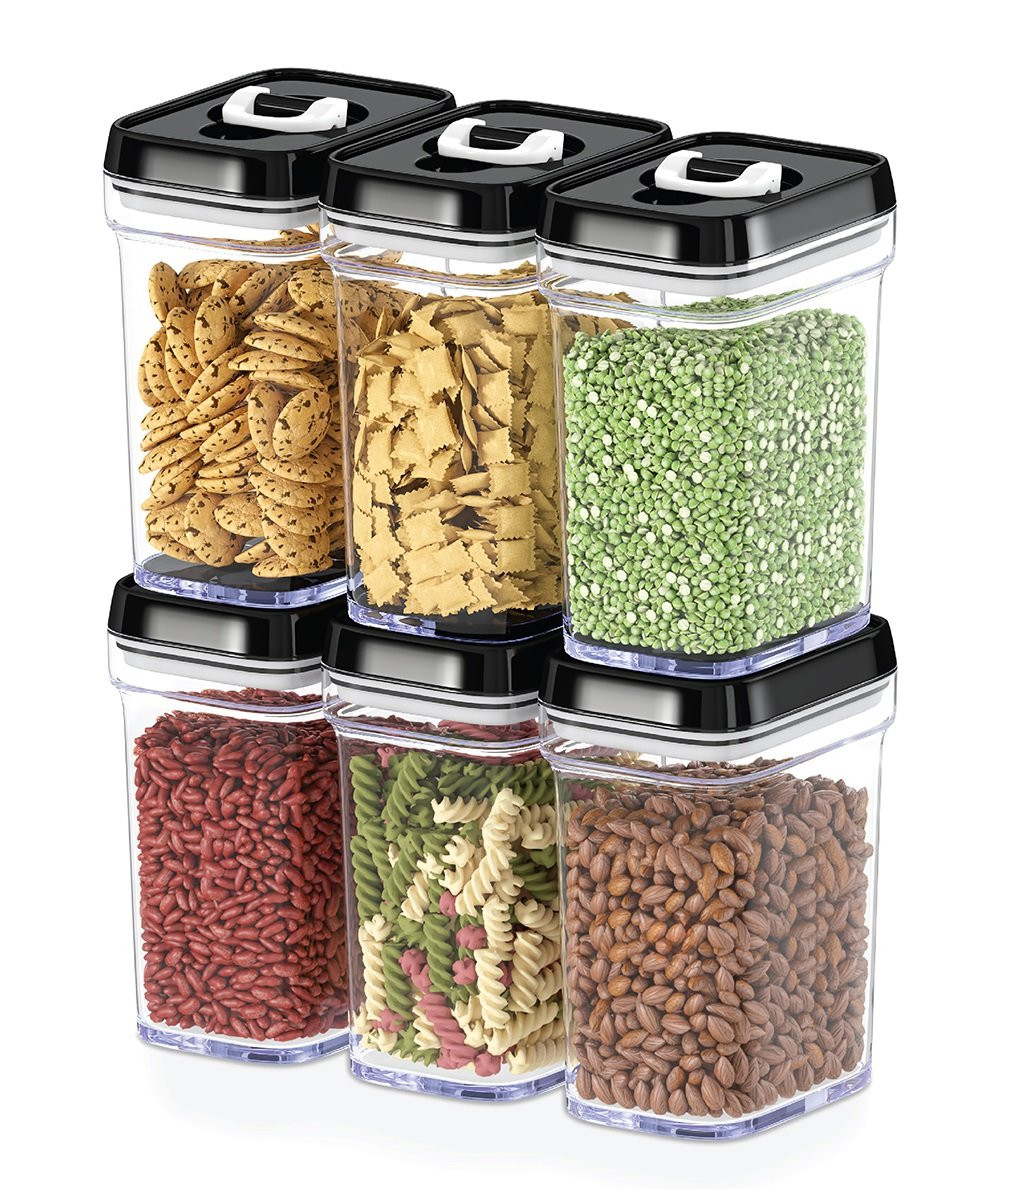 Kitchen Storage Container Sets
 Dwellza Kitchen Airtight Food Storage Containers with Lids